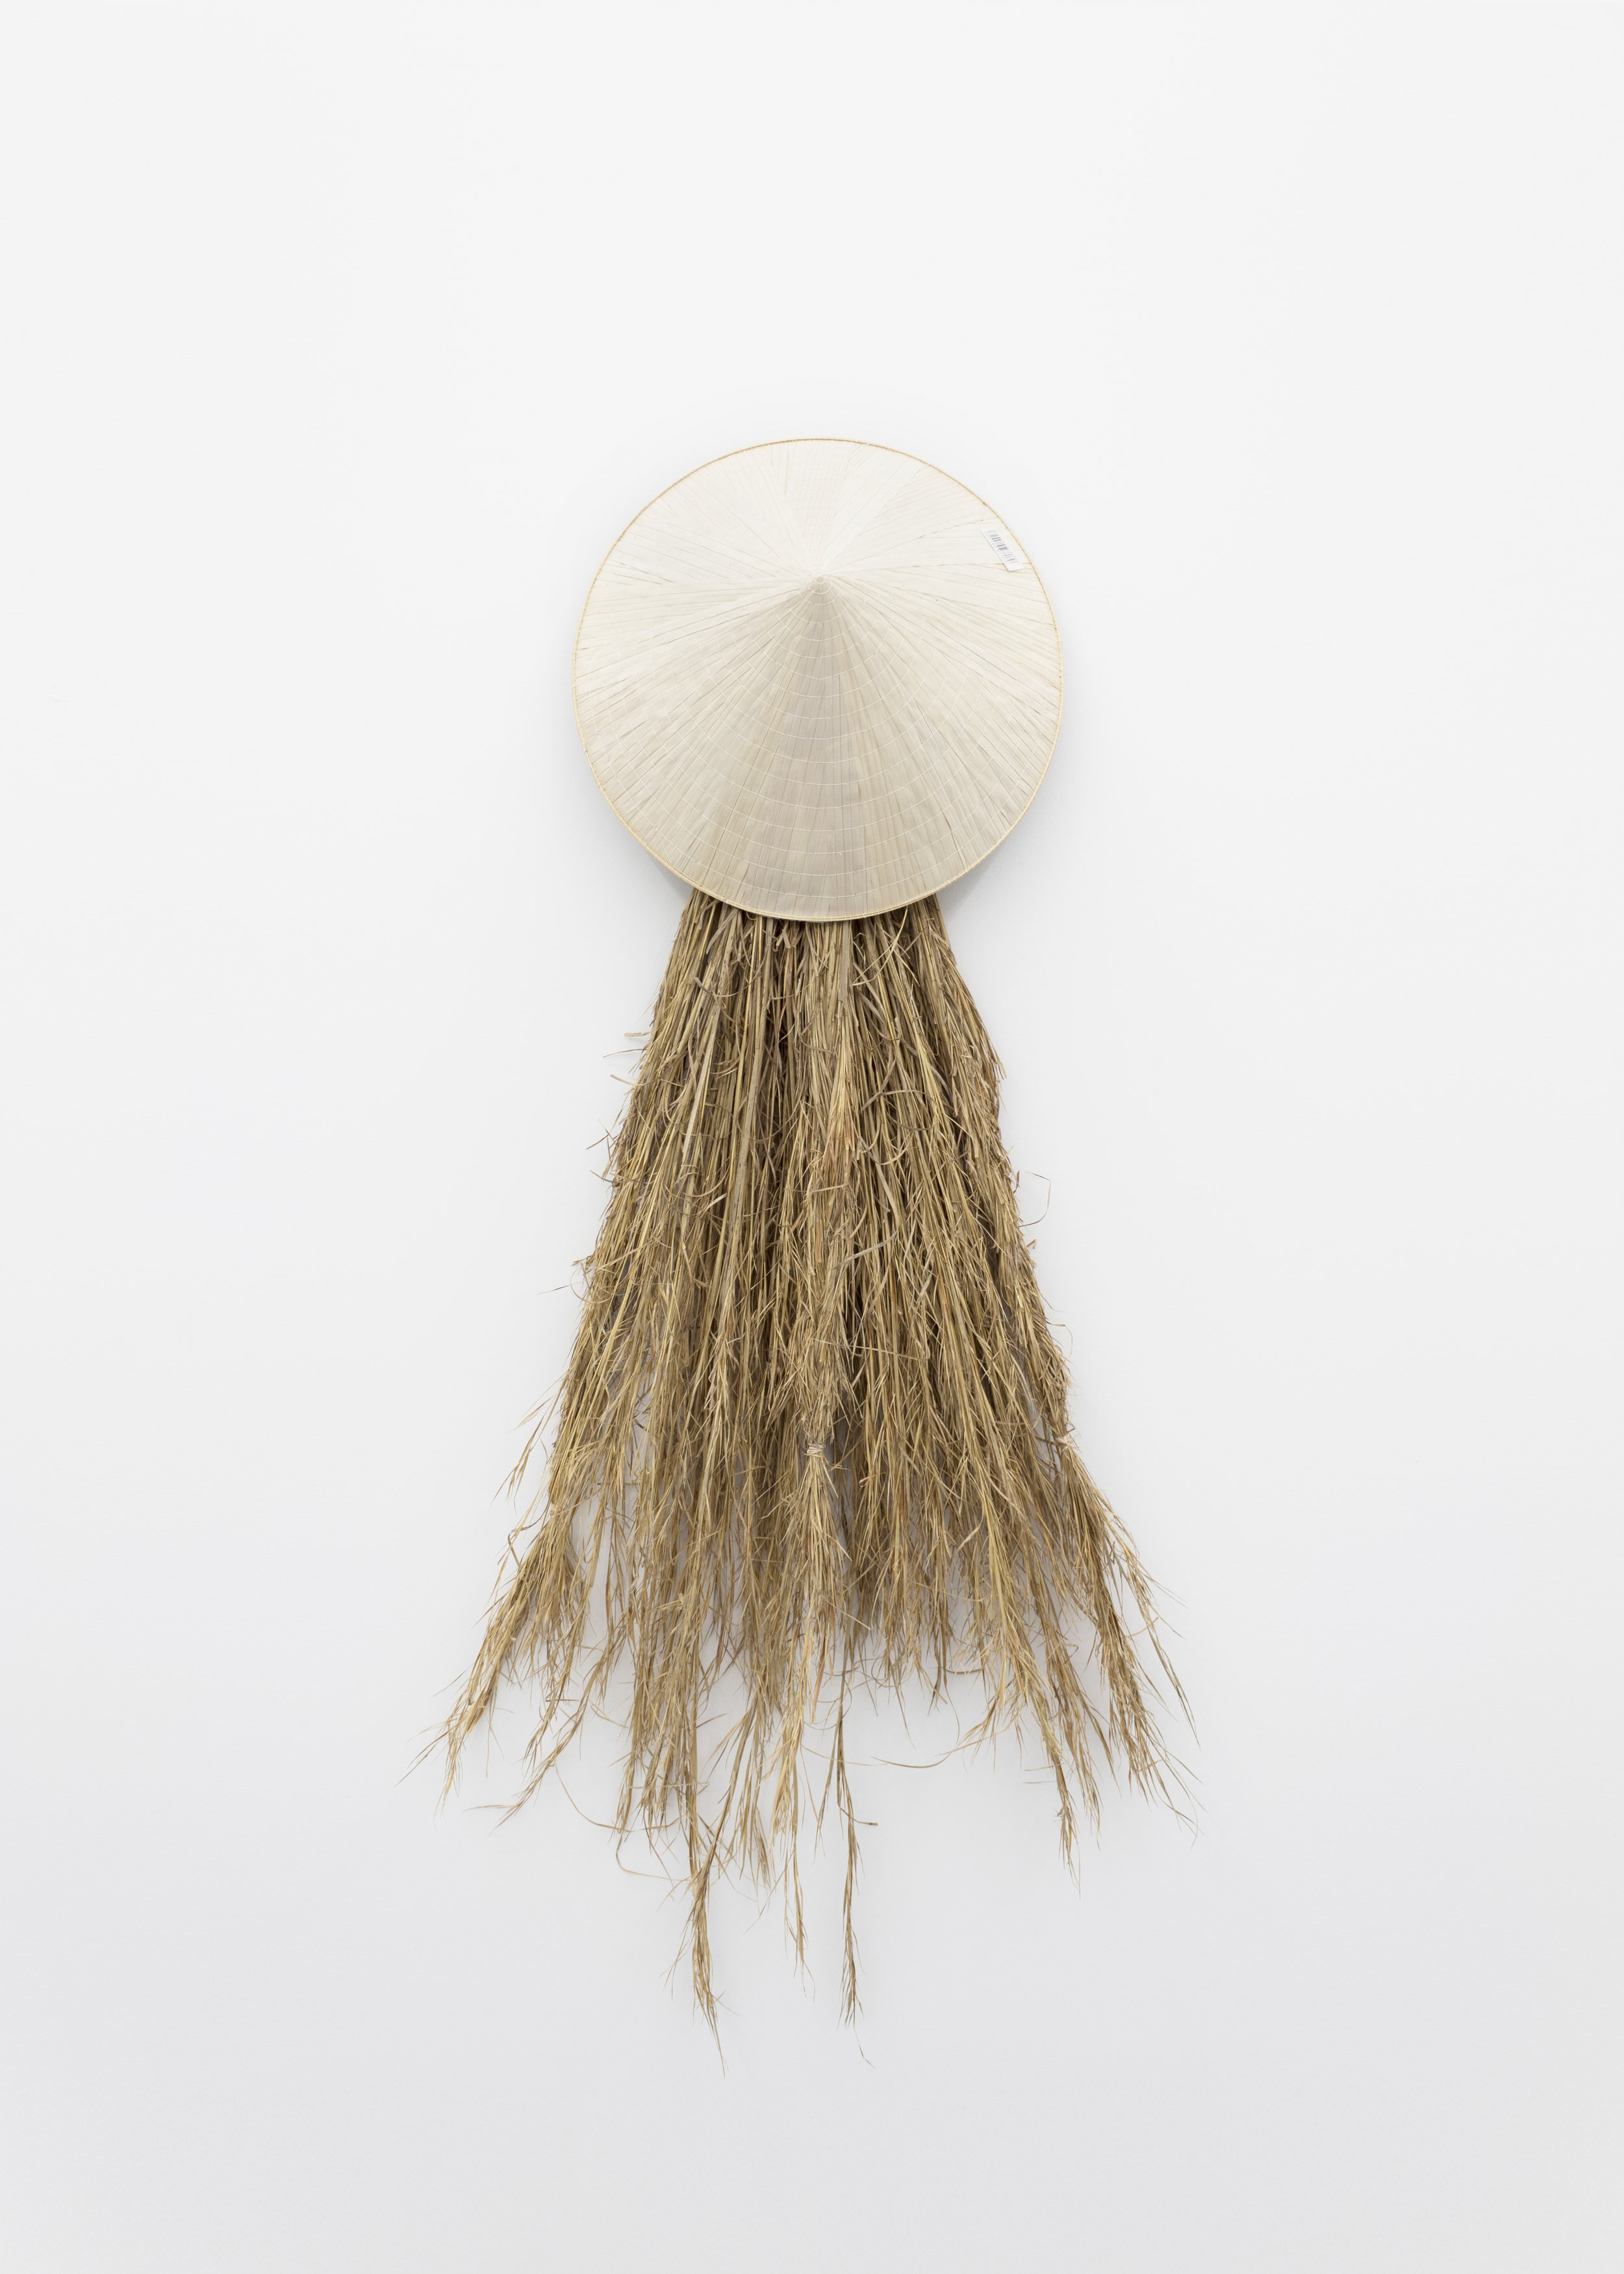  Millian Giang Lien Pham,  Preforge: 9 Stages (Five) , 2019. Grass, conical hat 